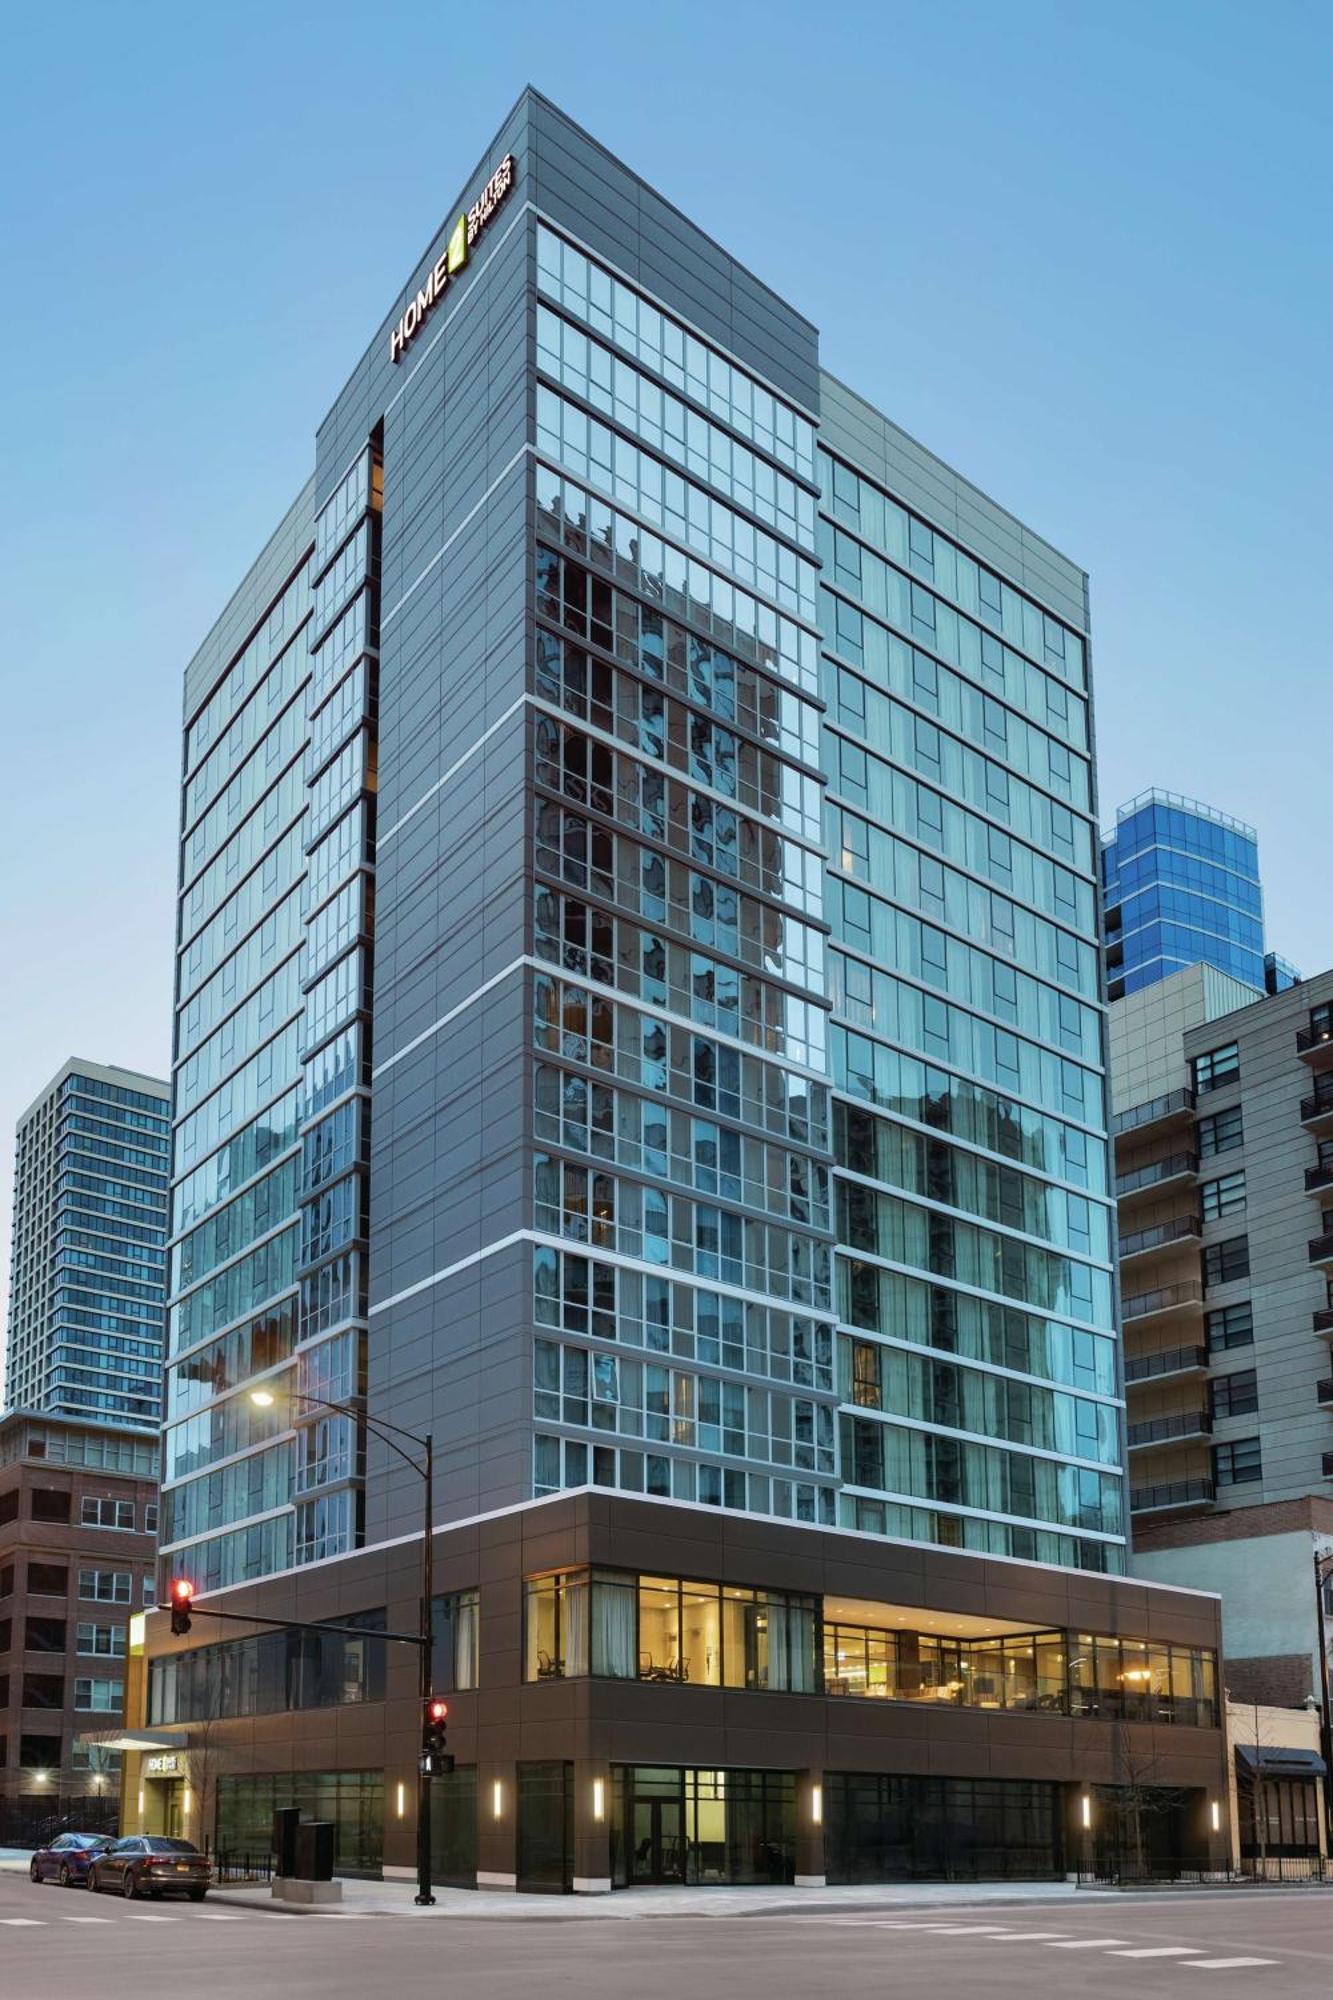 Home2 Suites By Hilton Chicago River North Exterior foto